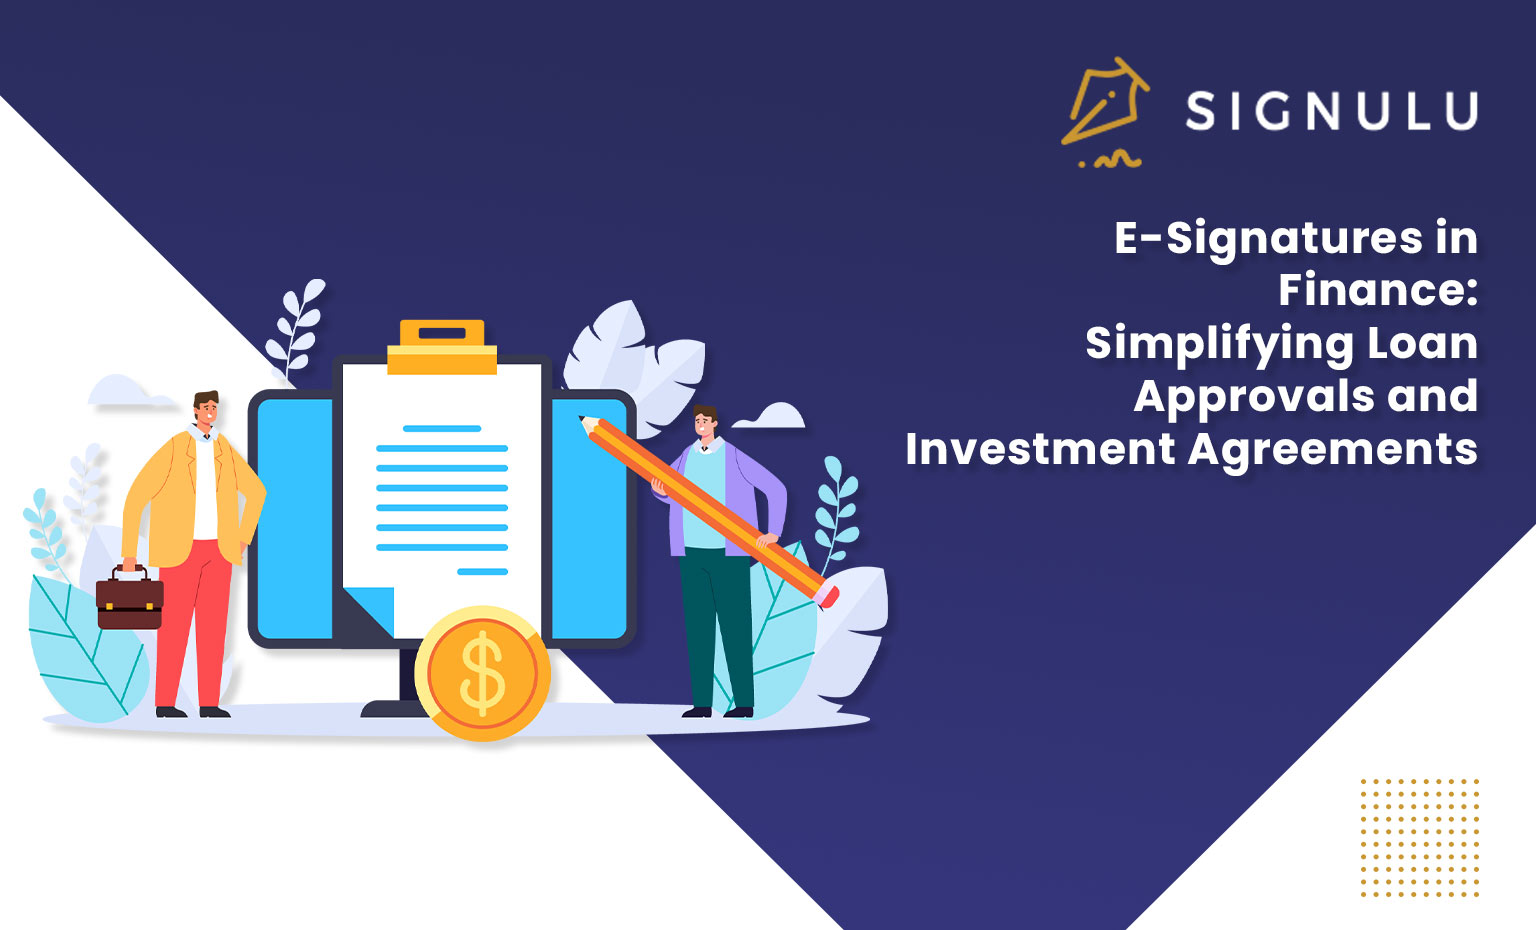 E-Signatures in Finance: Simplifying Loan Approvals and Investment Agreements